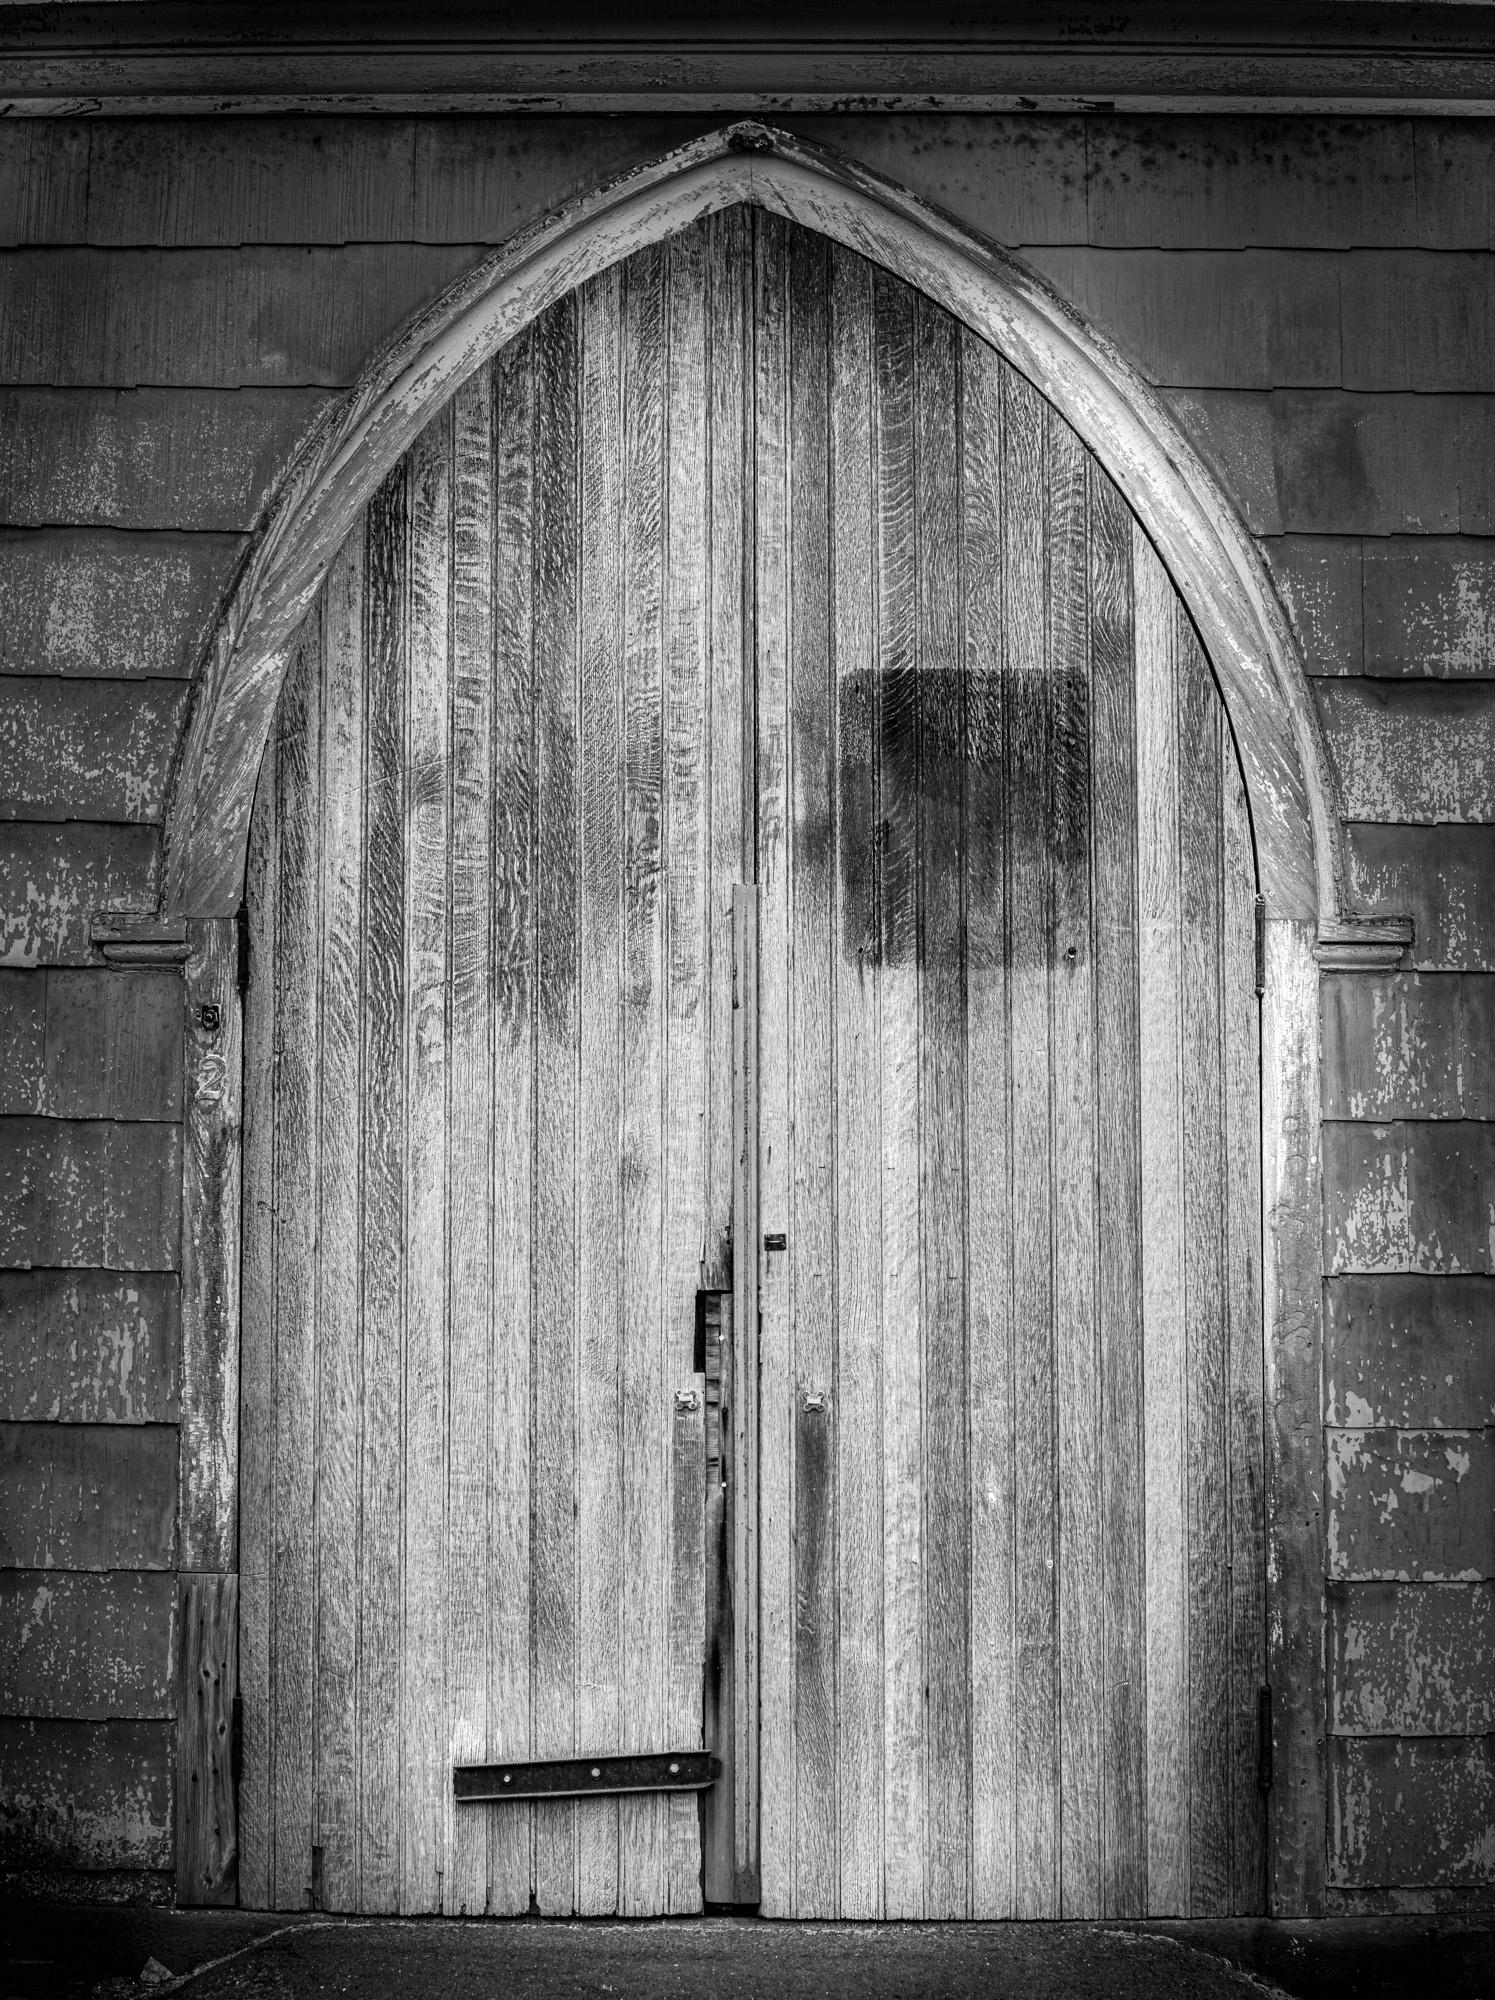 Howard Lewis Still-Life Photograph - Black and White Photograph "Church Entrance"